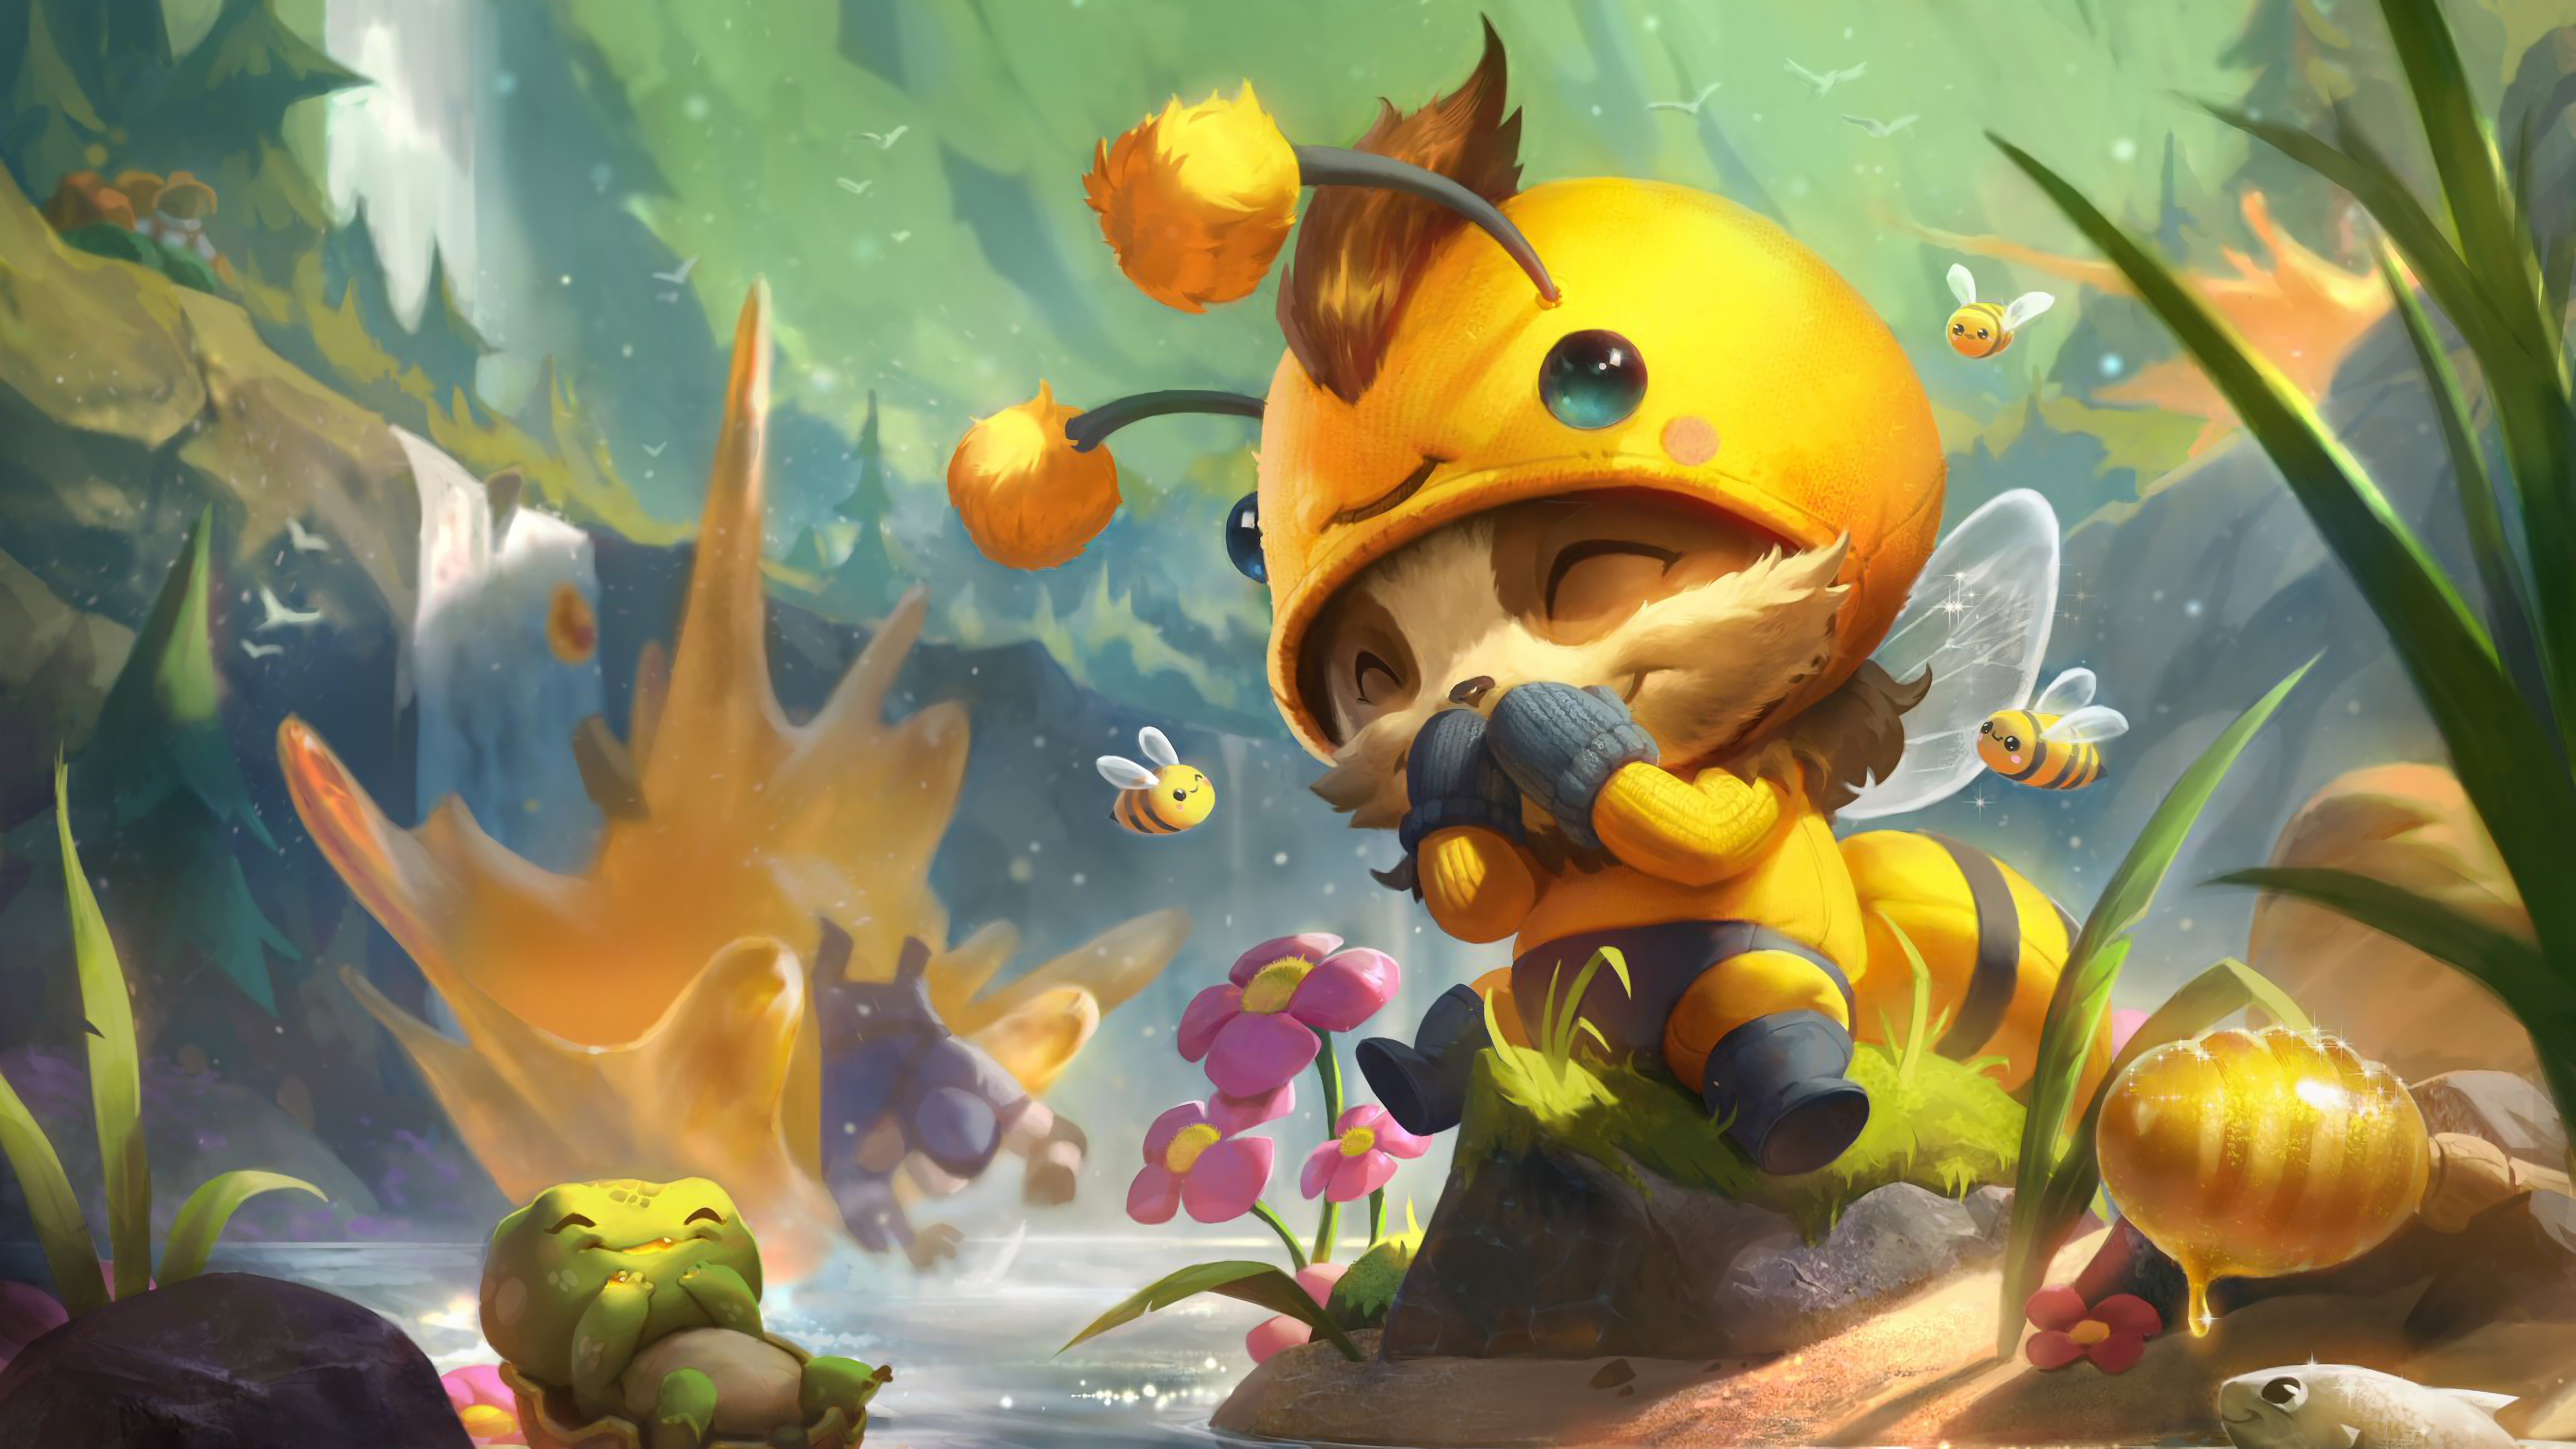 General 7680x4320 Bee (League of Legends) digital art Riot Games GZG video games Teemo (League of Legends) League of Legends 4K video game characters video game art water waterfall leaves bees insect smiling closed eyes gloves honey